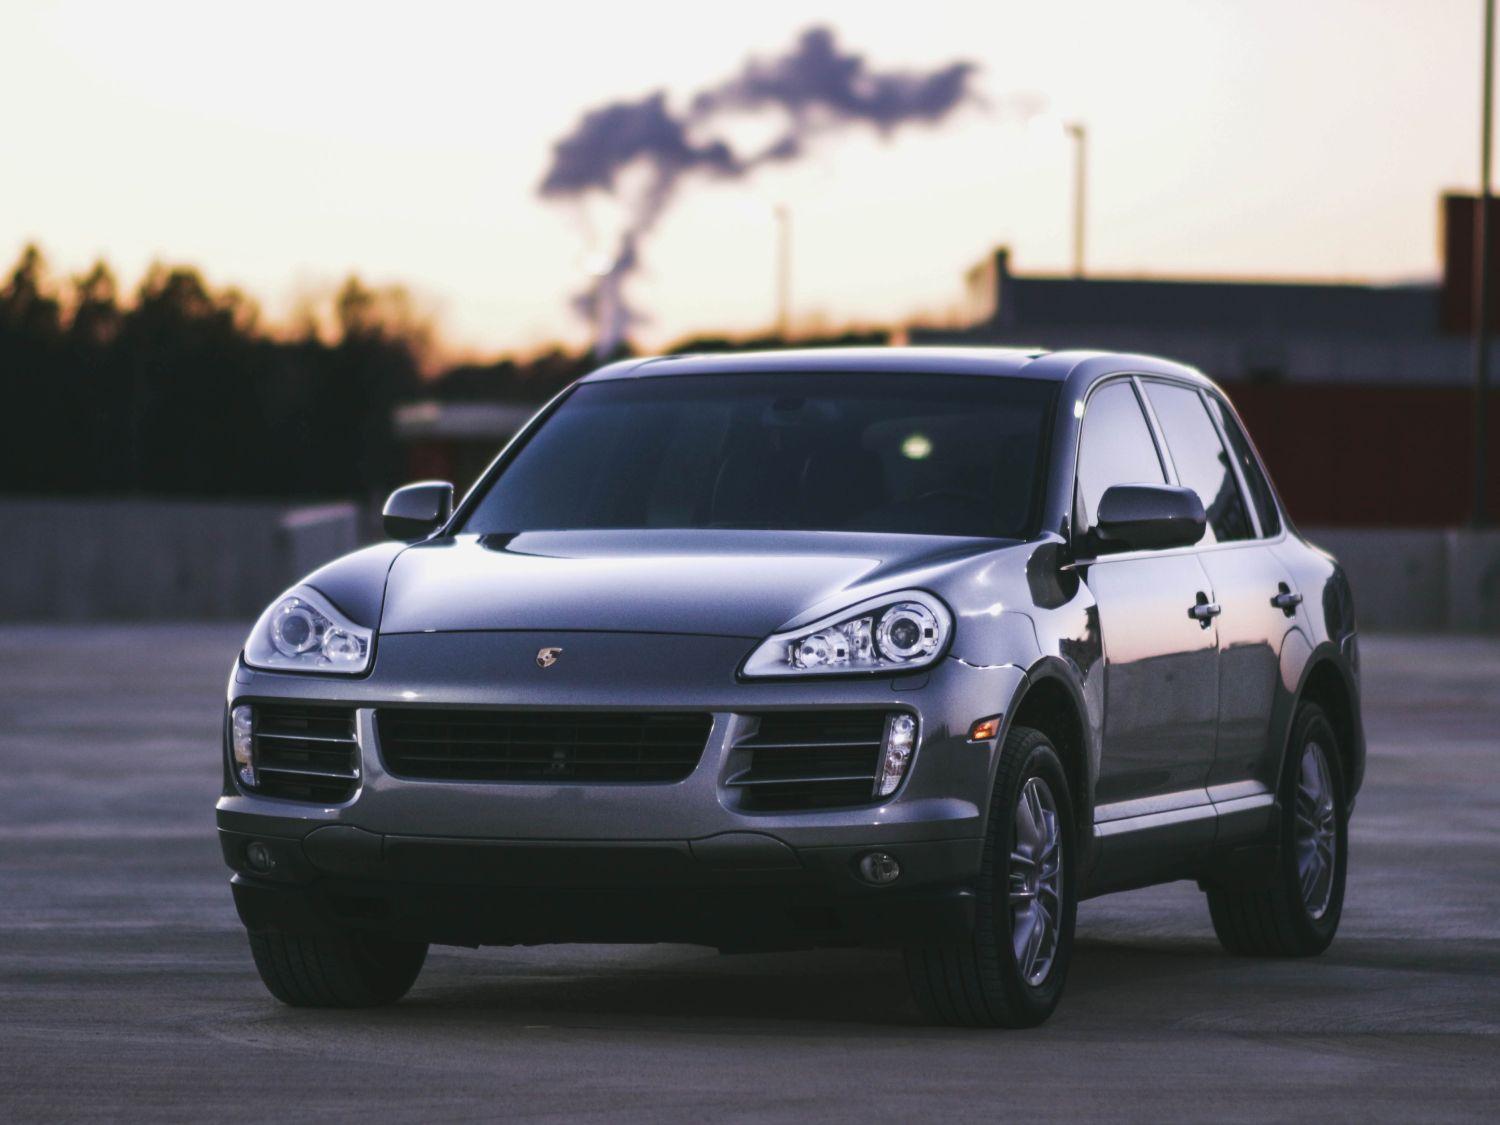 The Porsche Cayenne has become a favorite of off-roading enthusiasts.